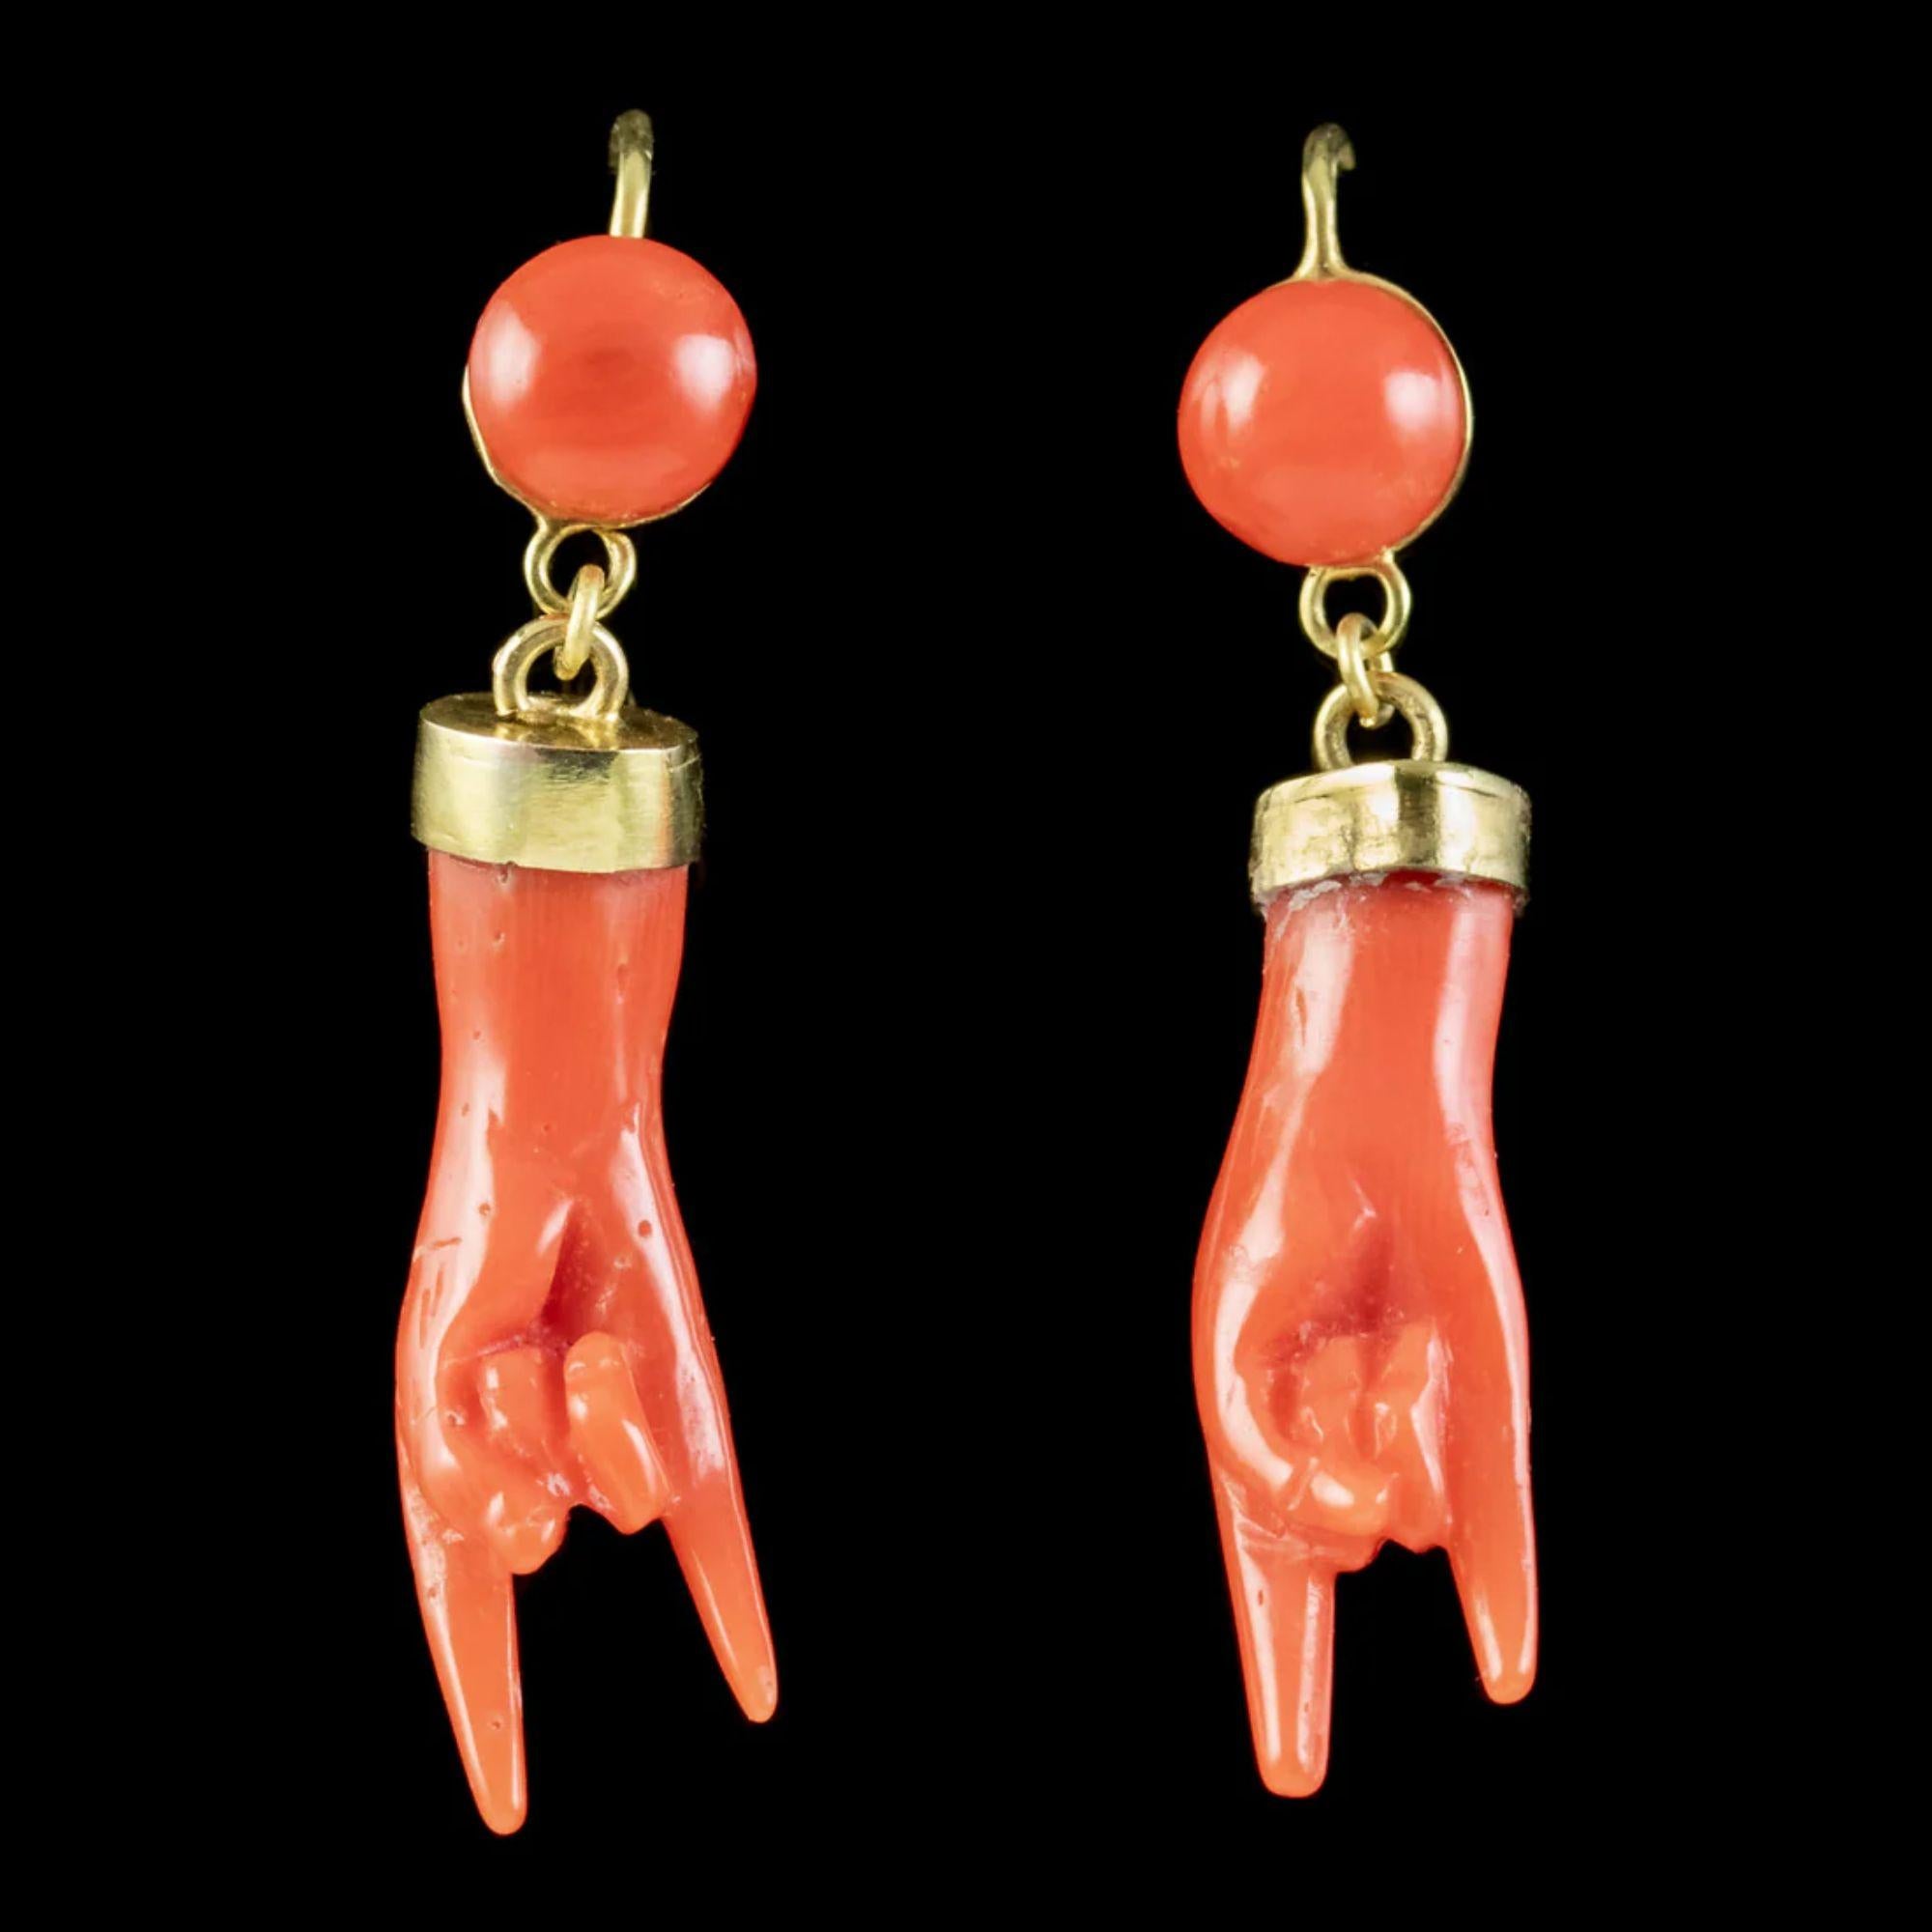 A wonderful pair of antique coral earrings made in Italy in the mid 19th Century. They depict two hand carved coral hands making a Corna (“horn”) gesture and have a lovely deep red/ orange colour that is produced naturally in the depths of the